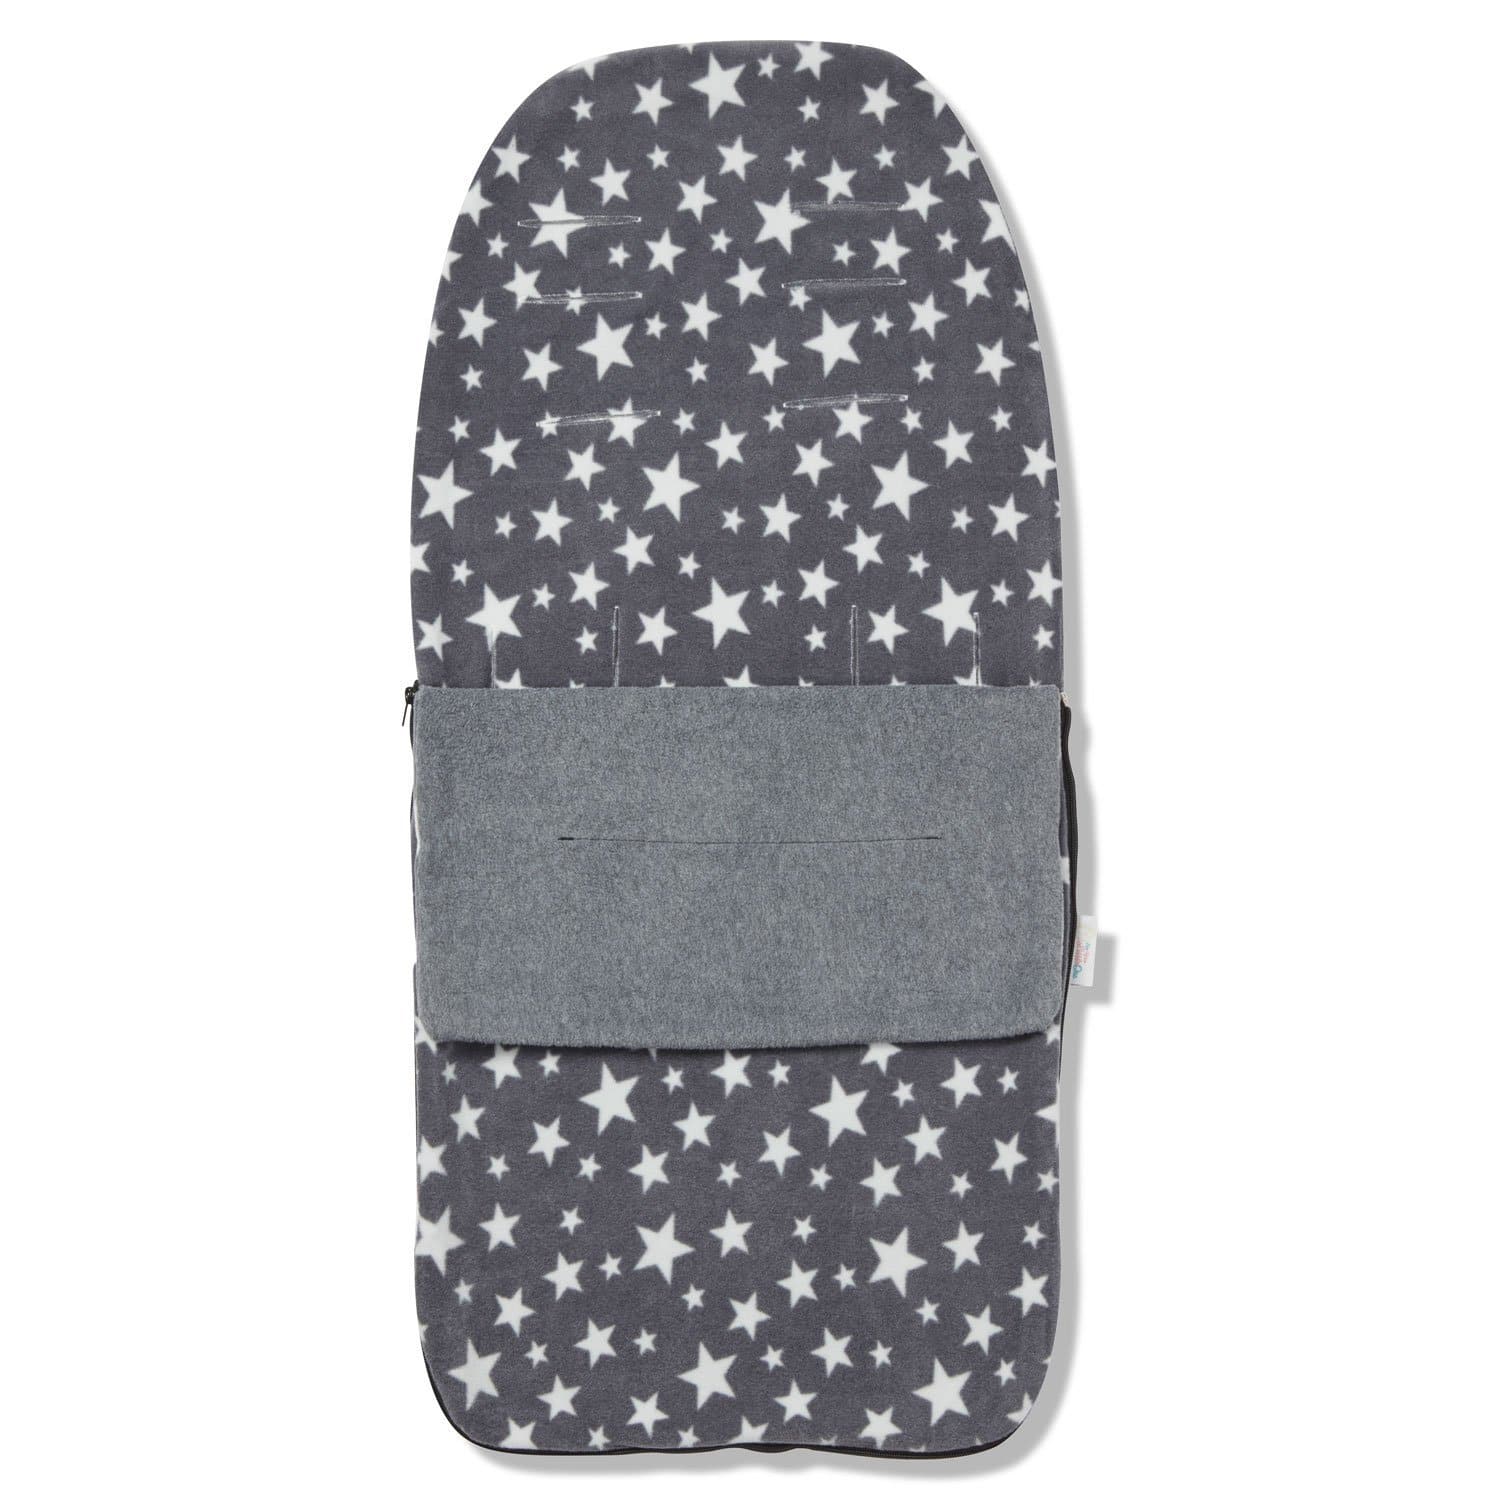 Snuggle Summer Footmuff Compatible with Babylo - Grey Star / Fits All Models | For Your Little One